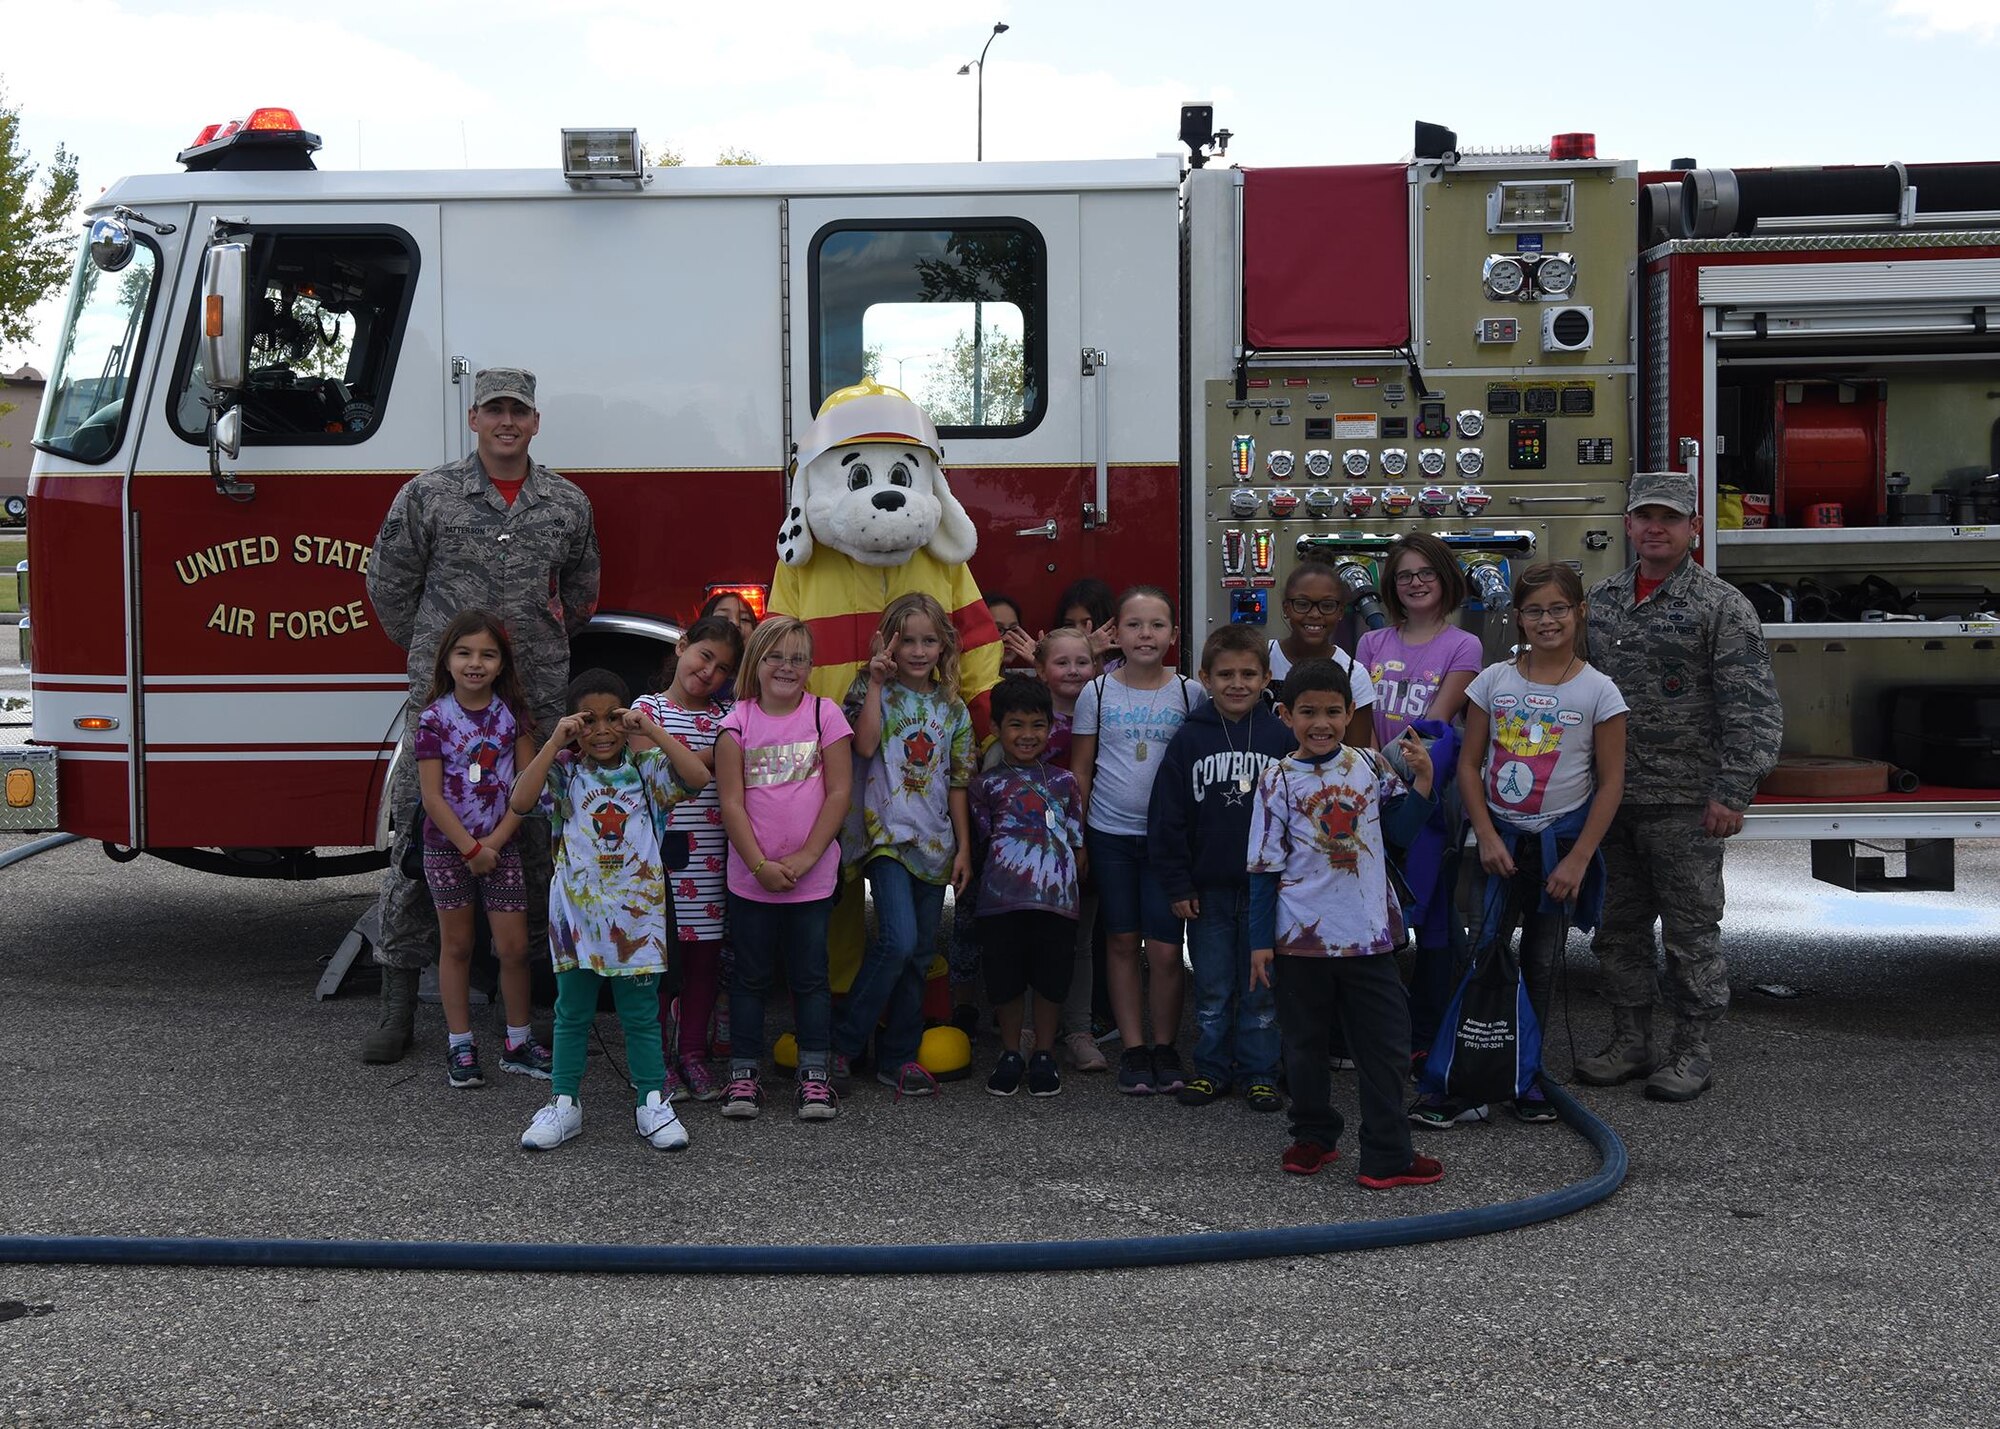 Children pose with members of the Fire Department and Sparky the dog during a kid’s deployment day event Sept. 29, 2017, at Grand Forks Air Force Base, North Dakota. The event was held to give children of military members the chance to experience what a deployment is like. (U.S. Air Force photo/Senior Airman Cierra Presentado)